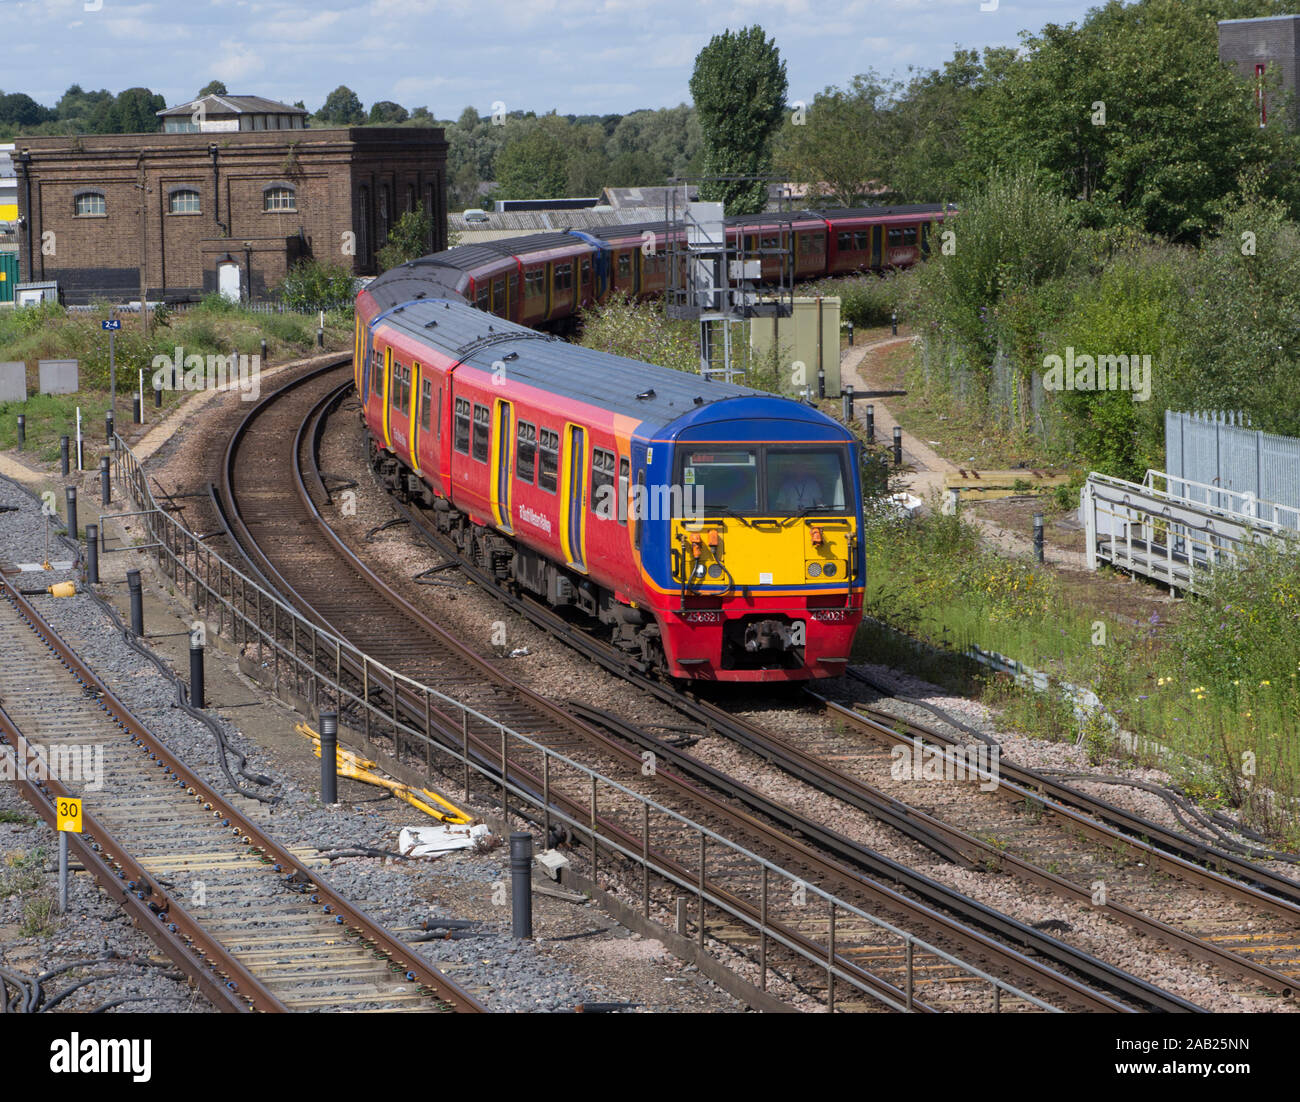 South Western Raailway Class 456 electric train approches Guildford ,Surrey station on 13.08.19. Stock Photo